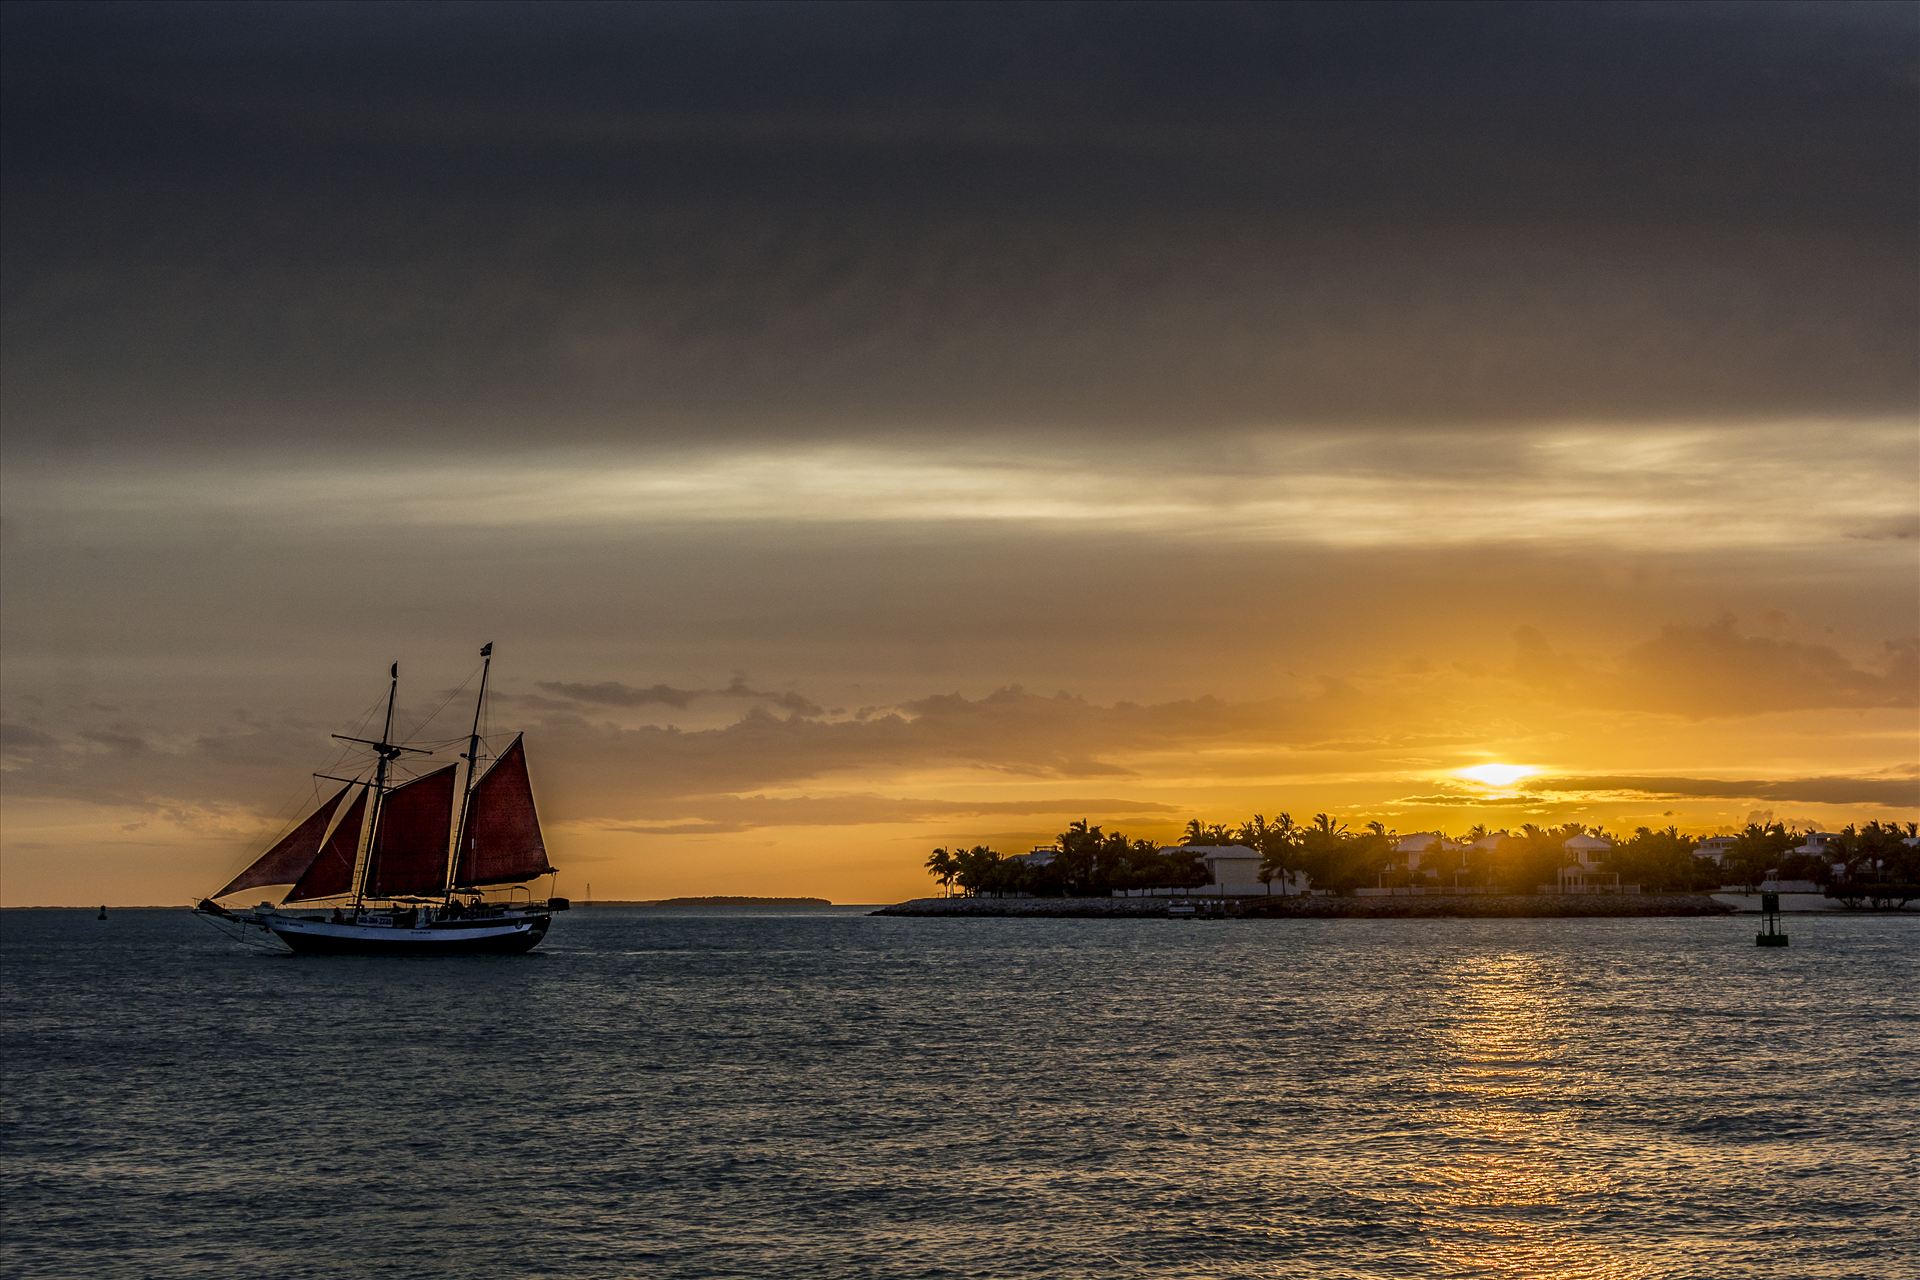 Galleon Sunset.jpg Key West sunset celebration with tall ships in the distance. by Sarah Williams